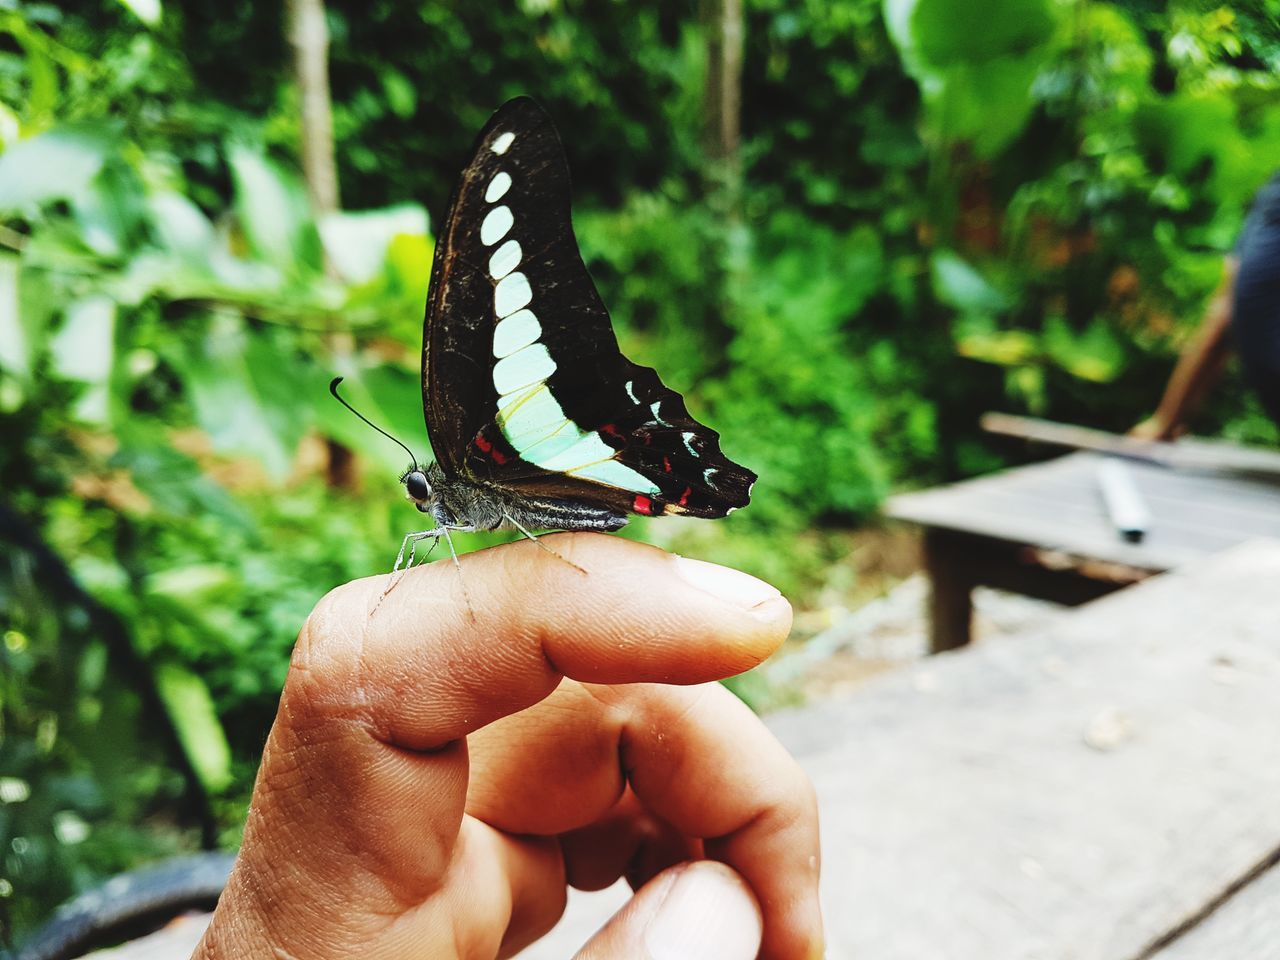 CLOSE-UP OF BUTTERFLY ON HAND HOLDING FINGER